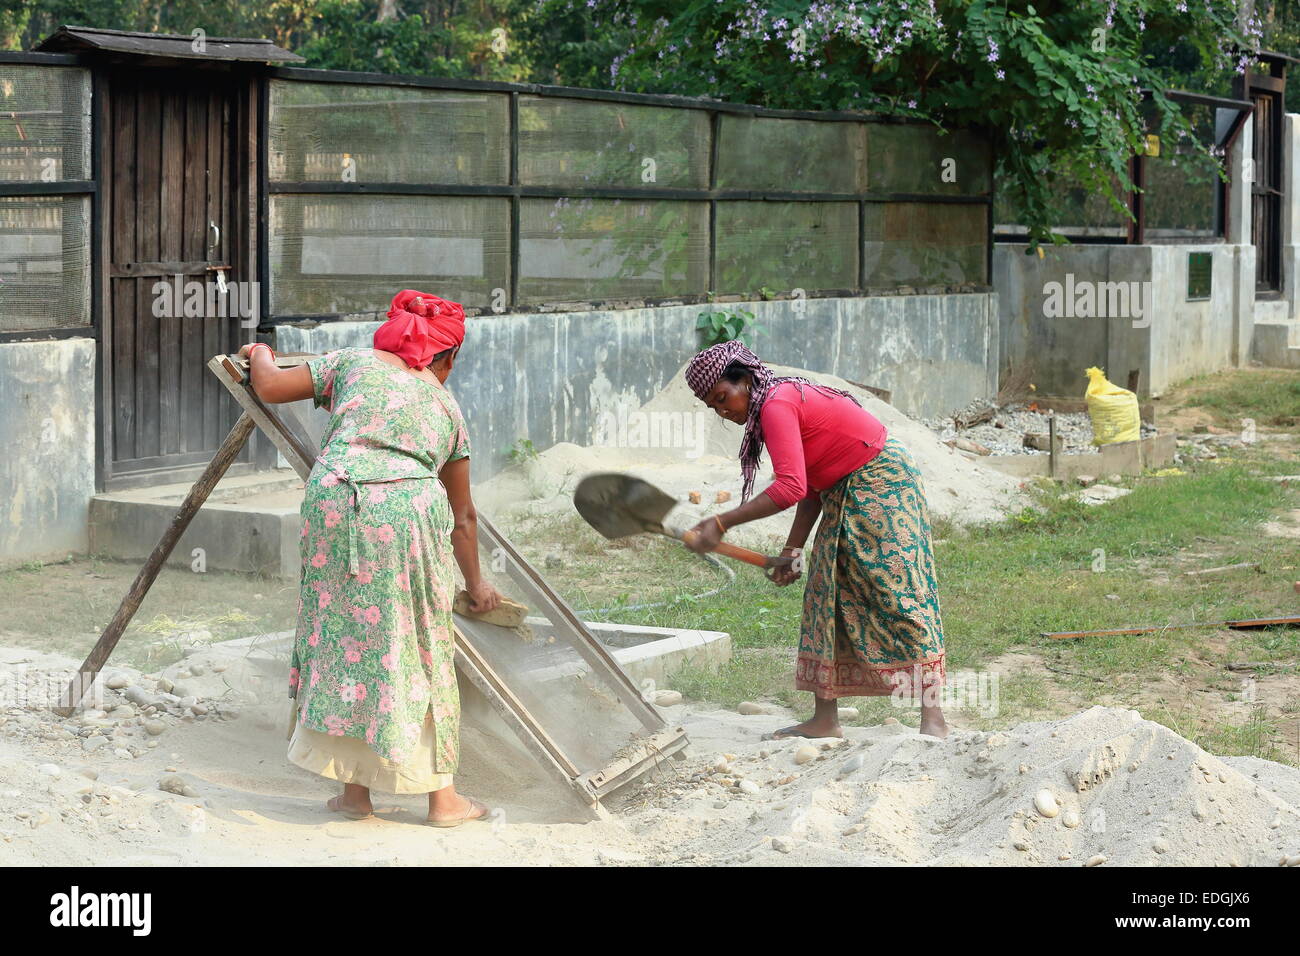 CHITWAN, NEPAL - OCTOBER 14: Local women work in maintenance tasks of the Gharial Conservation Program facilities on October 14, Stock Photo